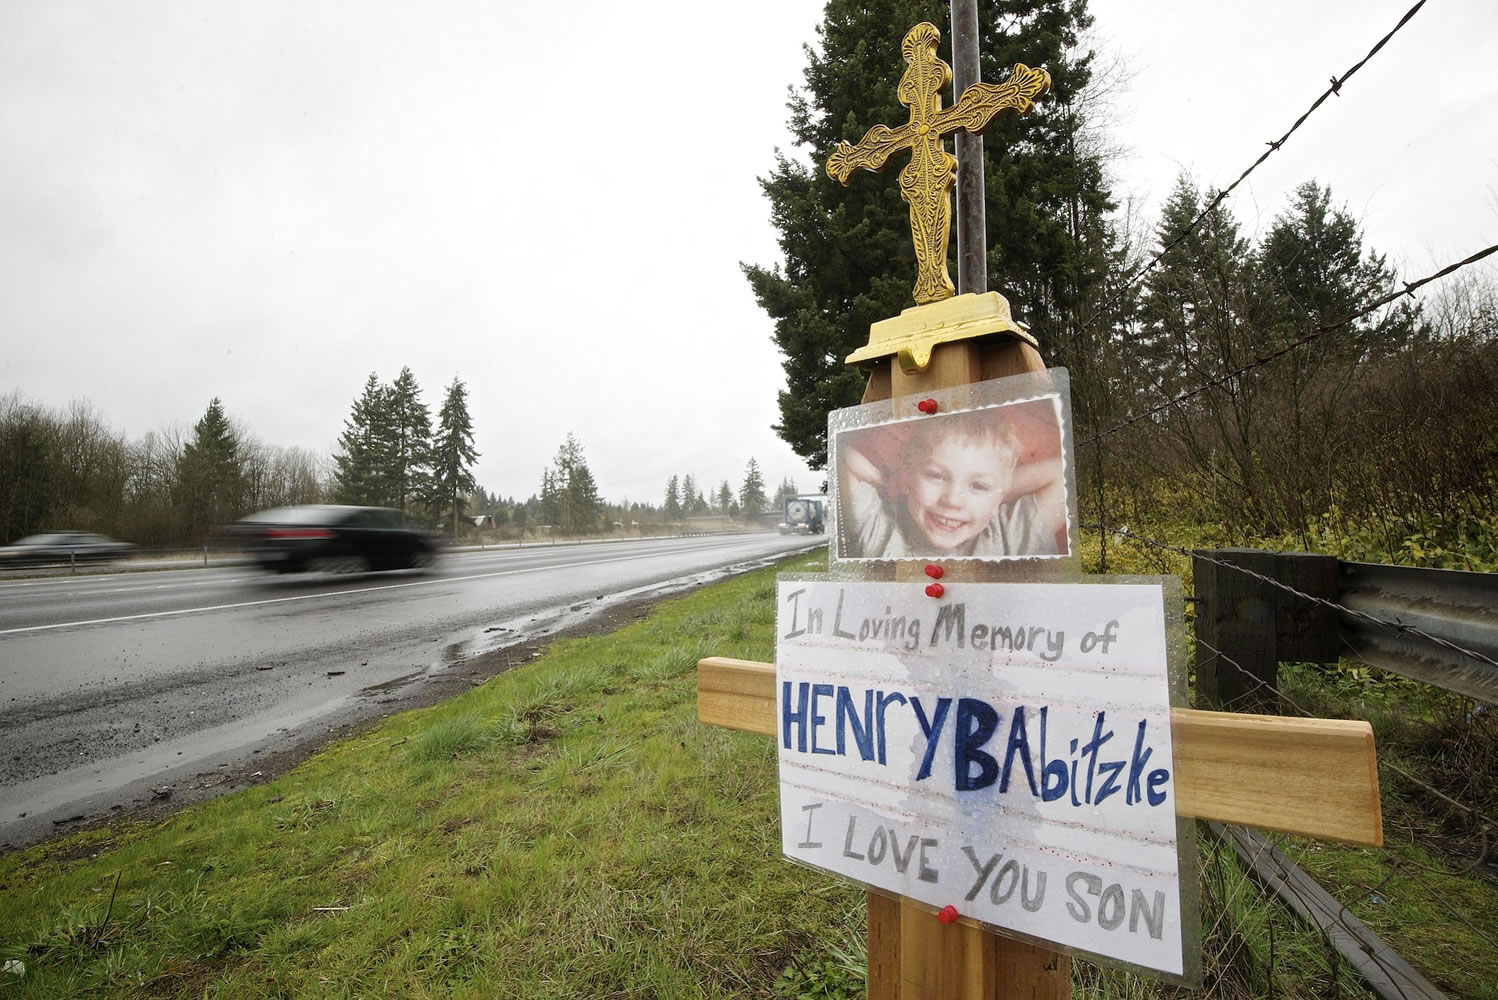 Motorists drive past a memorial for 6-year-old Henry Babitzke on March 6. He was killed in a collision on Interstate 5 on Feb.